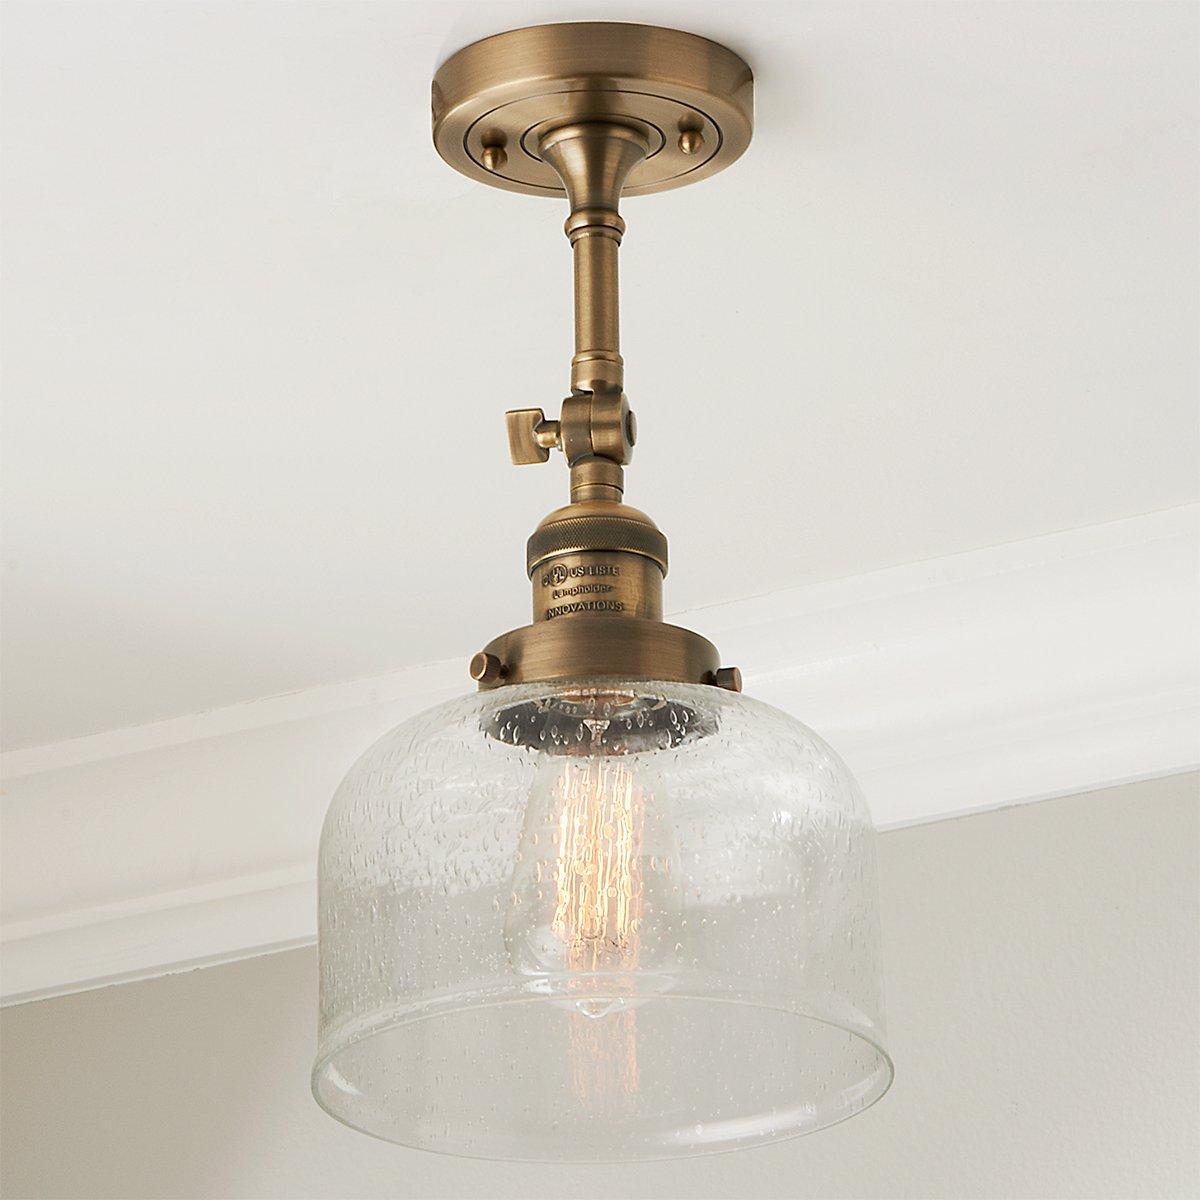 Kelsey Convertible Ceiling Light - Dome Seeded